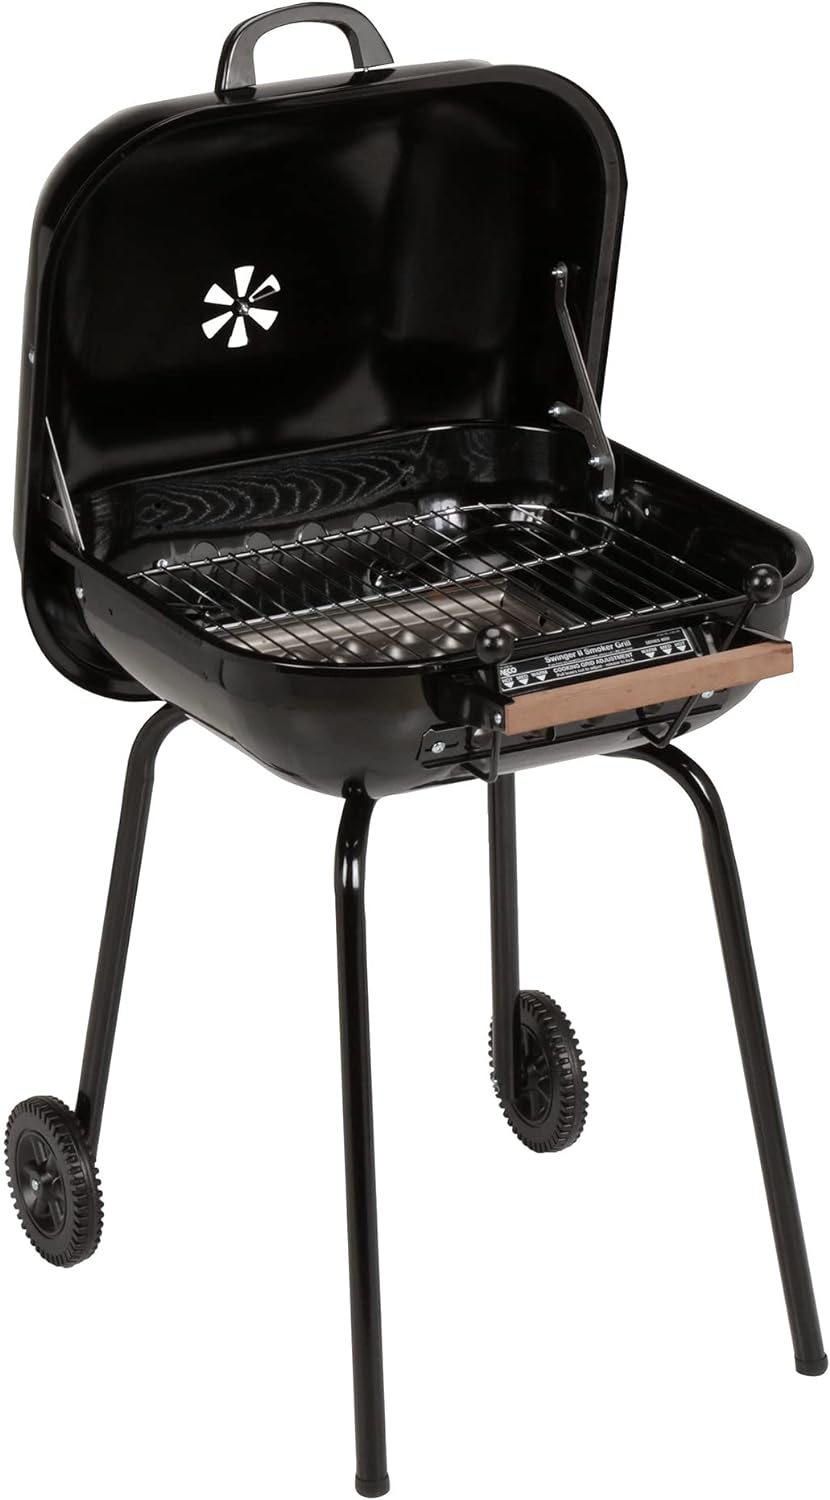 MECO Americana Swinger Portable Wheeled Outdoor Camping Tailgating Charcoal Grill with Adjustable Grid, Air Vents, Side Tables,  Bottom Shelf, Black